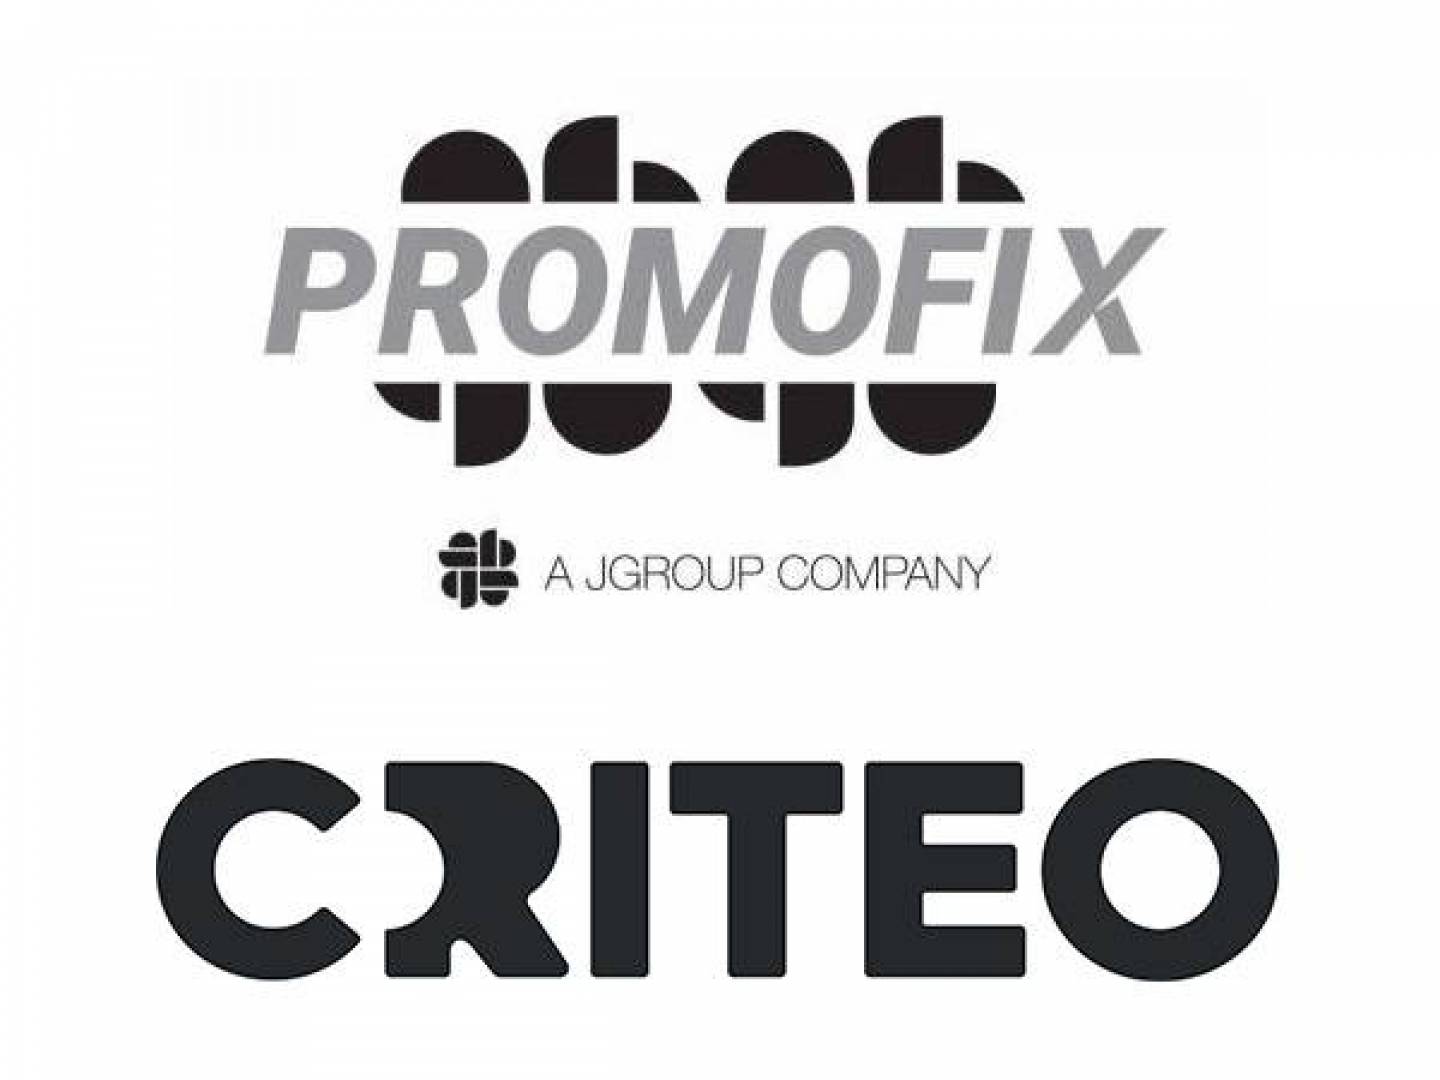 Promofix partners with Criteo and expands market reach across lower Gulf and Levant